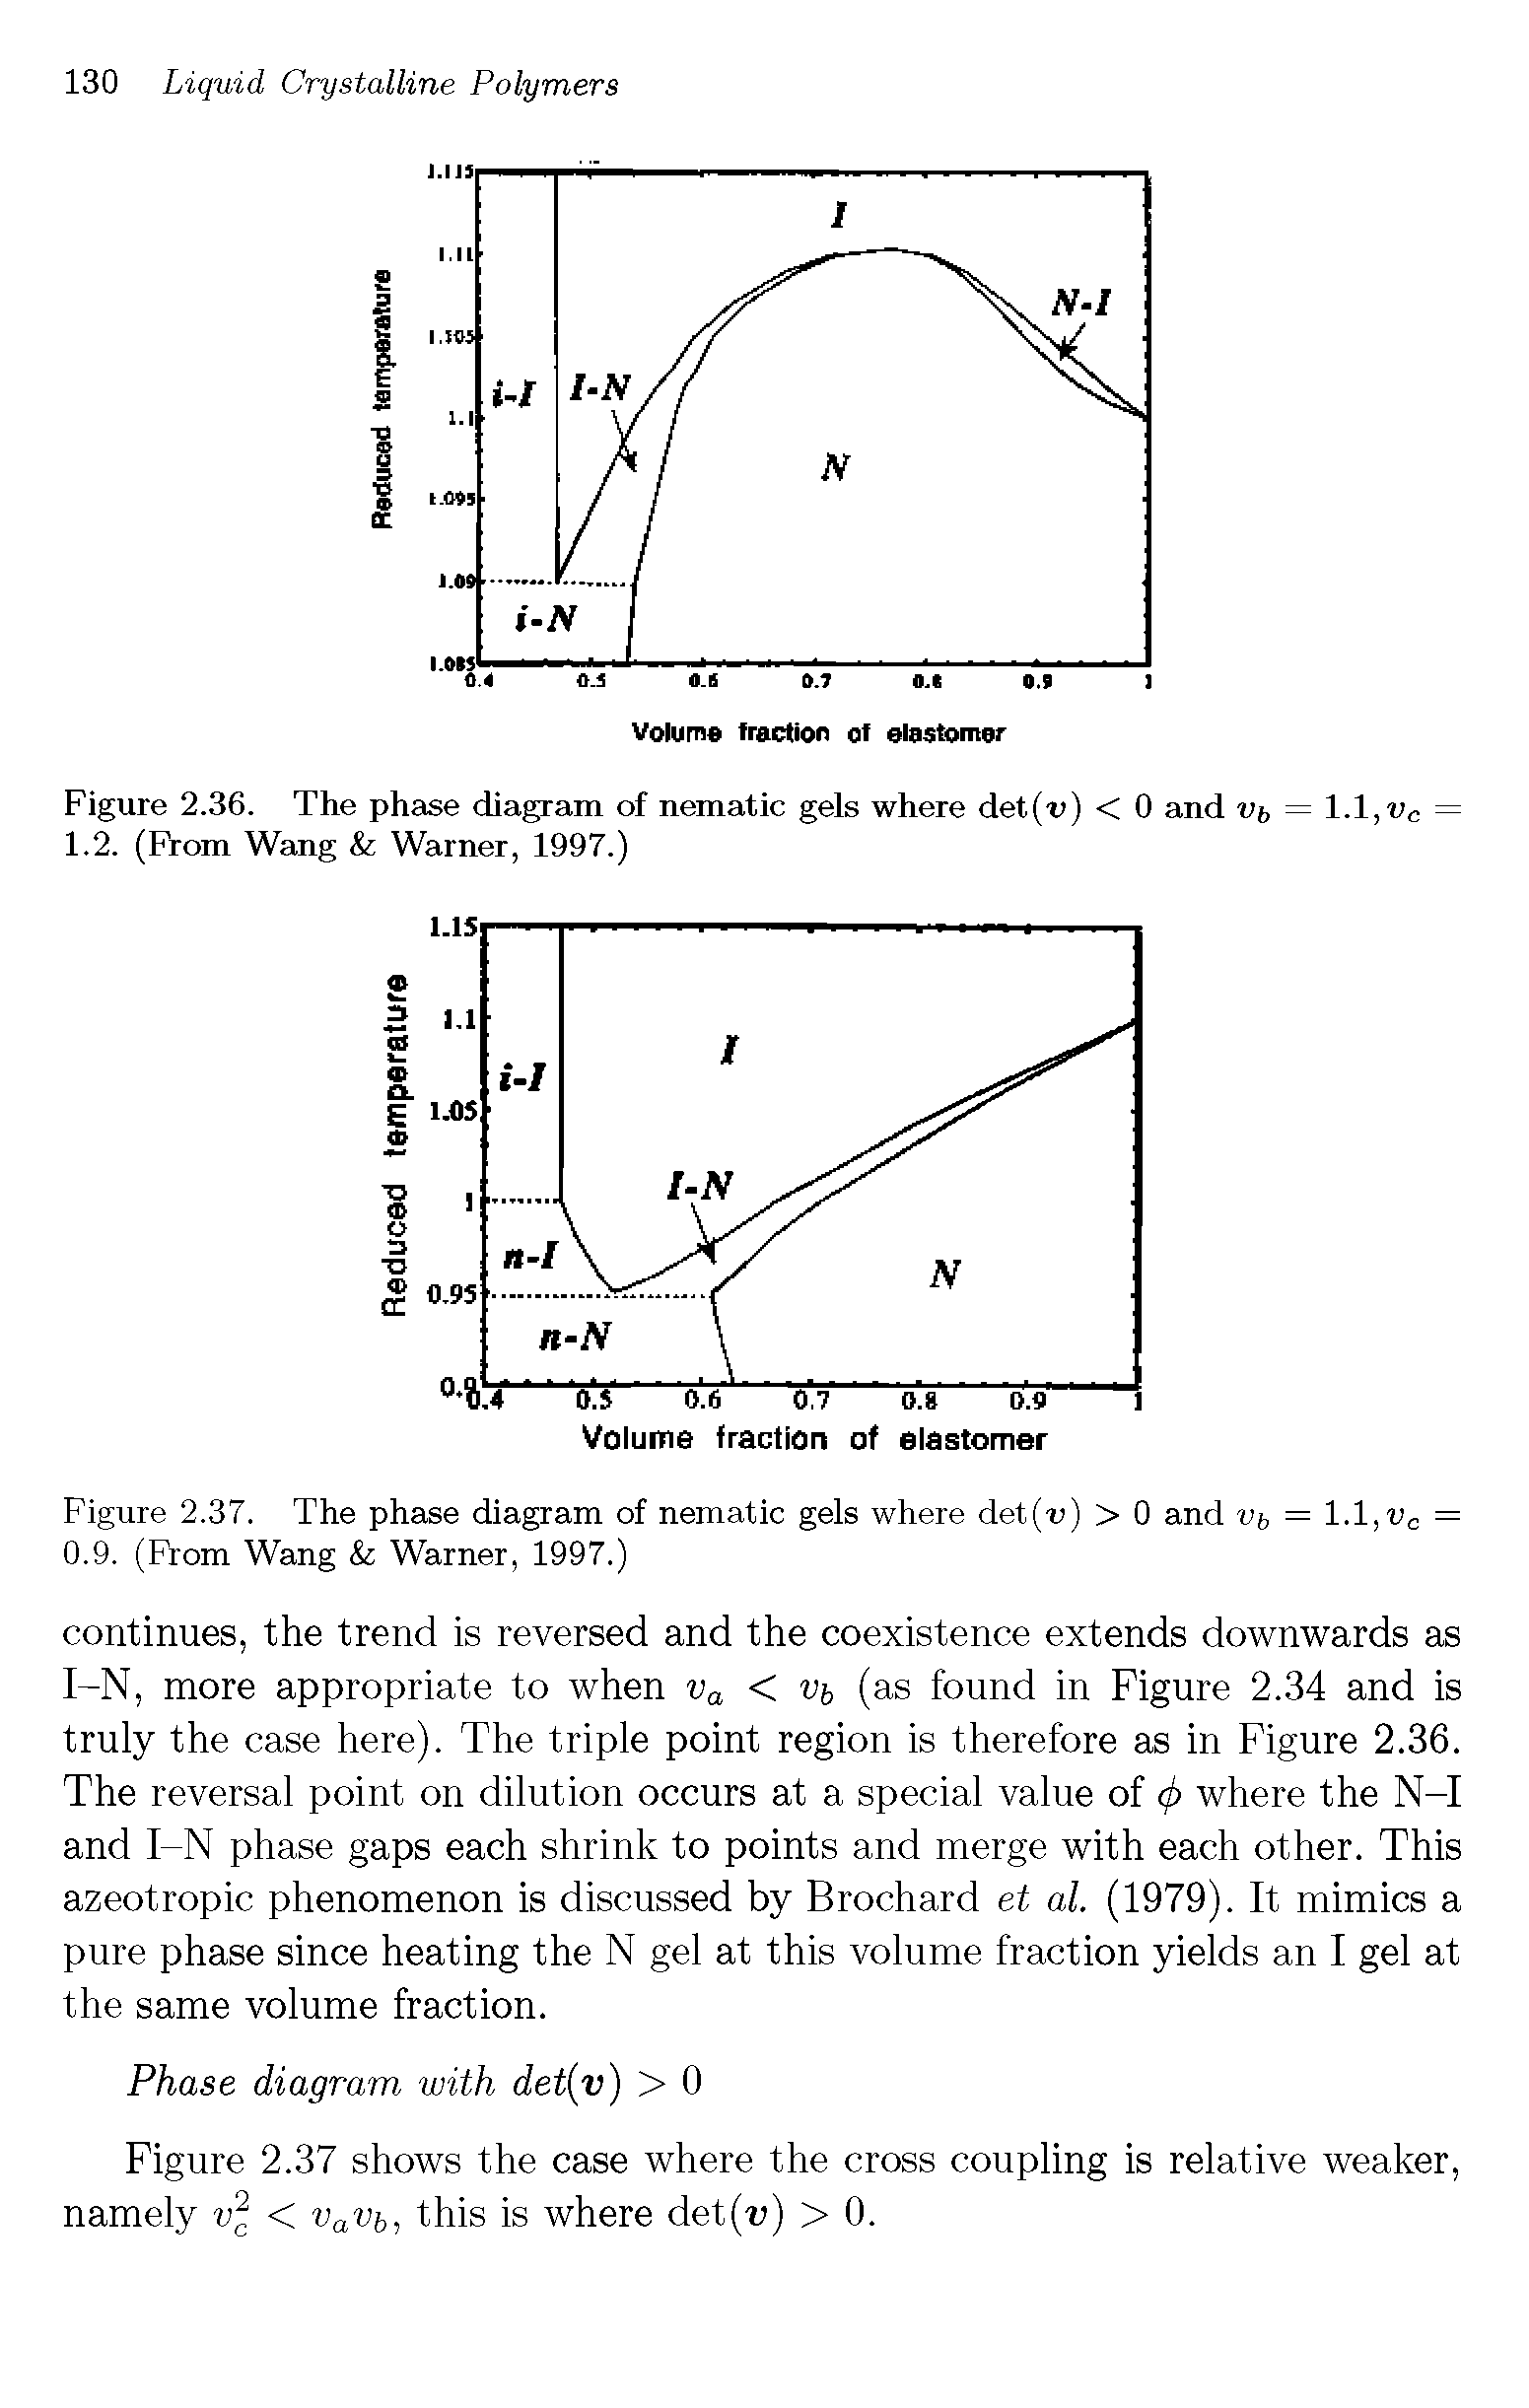 Figure 2.36. The phase diagram of nematic gels where det (v) < 0 and vt = 1.1, vr = 1.2. (From Wang Warner, 1997.)...